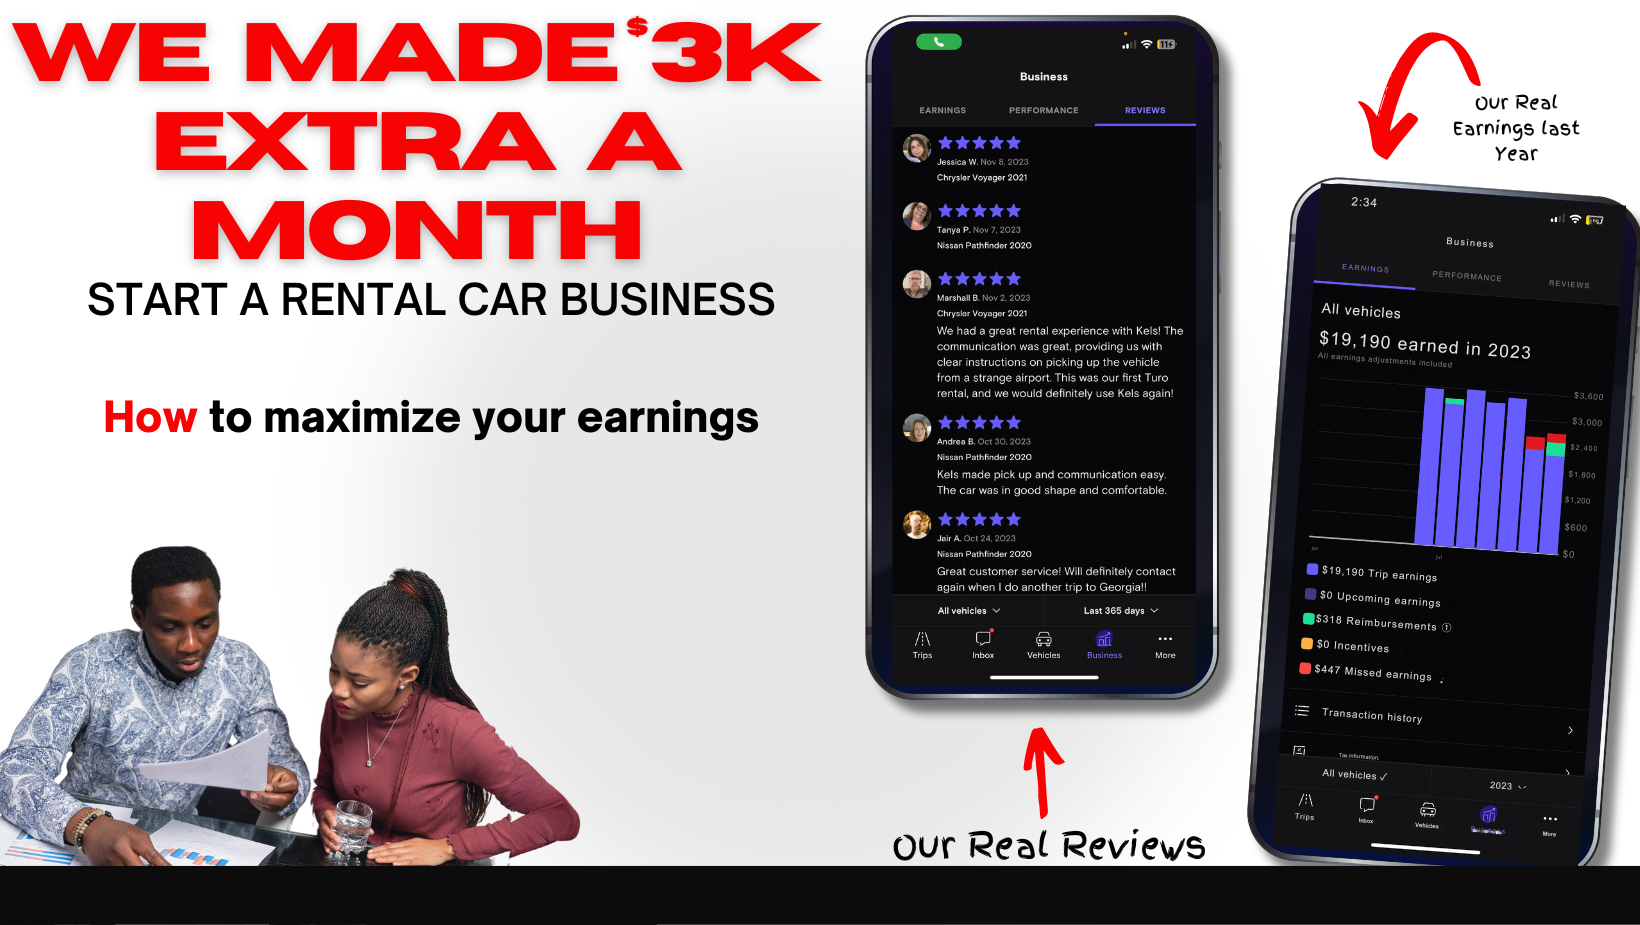 Start a rental car business. We made 3000 a month with our rental car business.